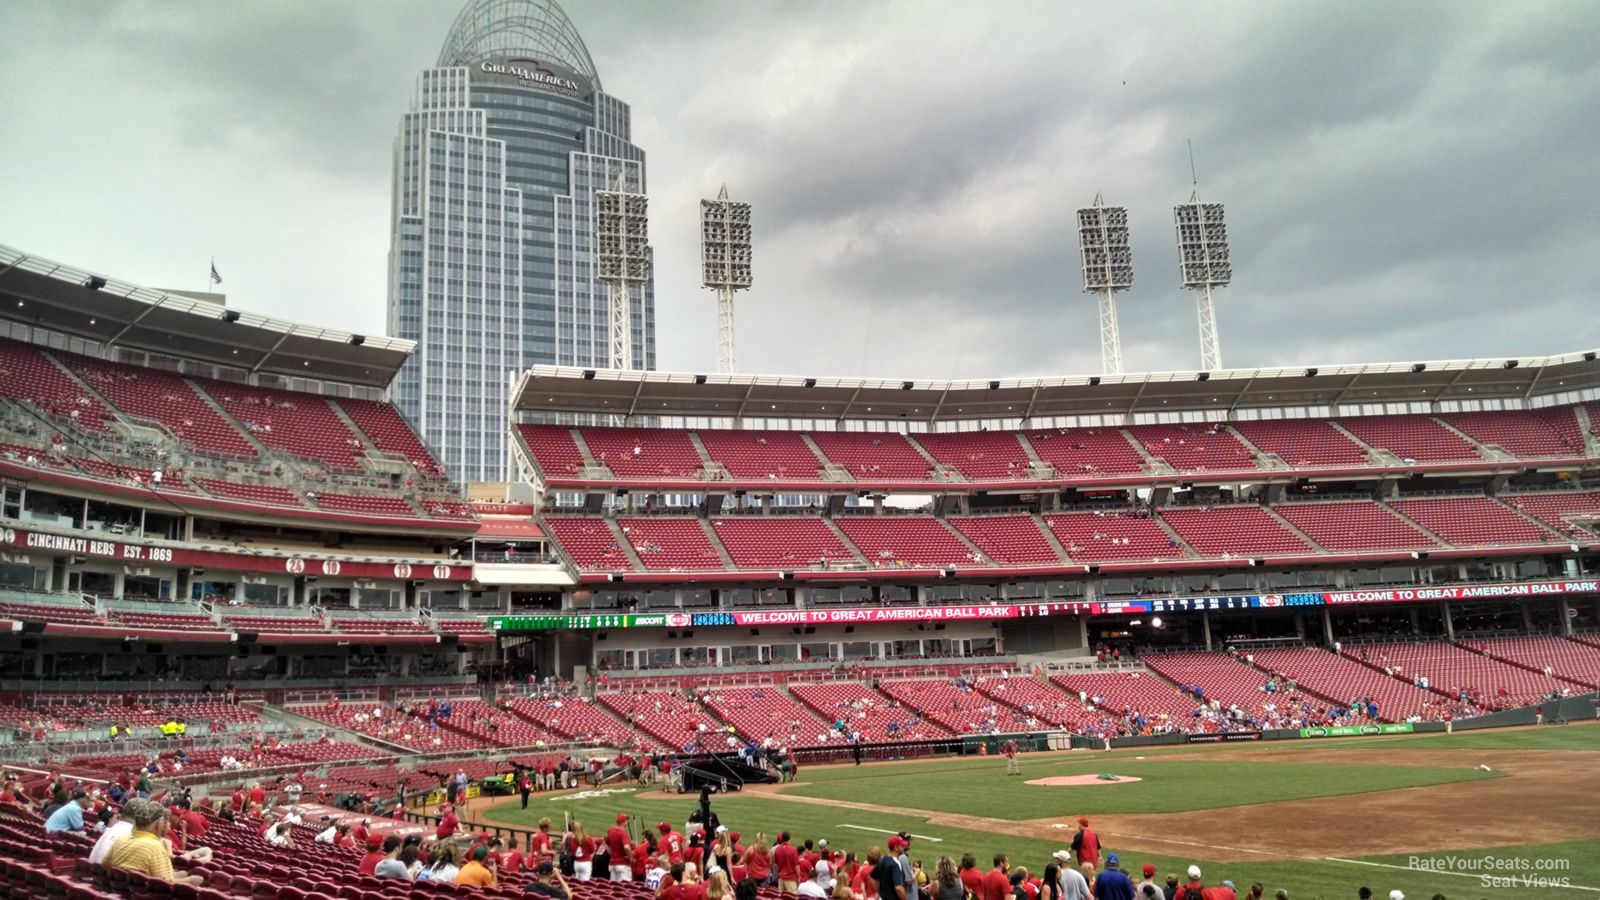 Section 134 at Great American Ball Park